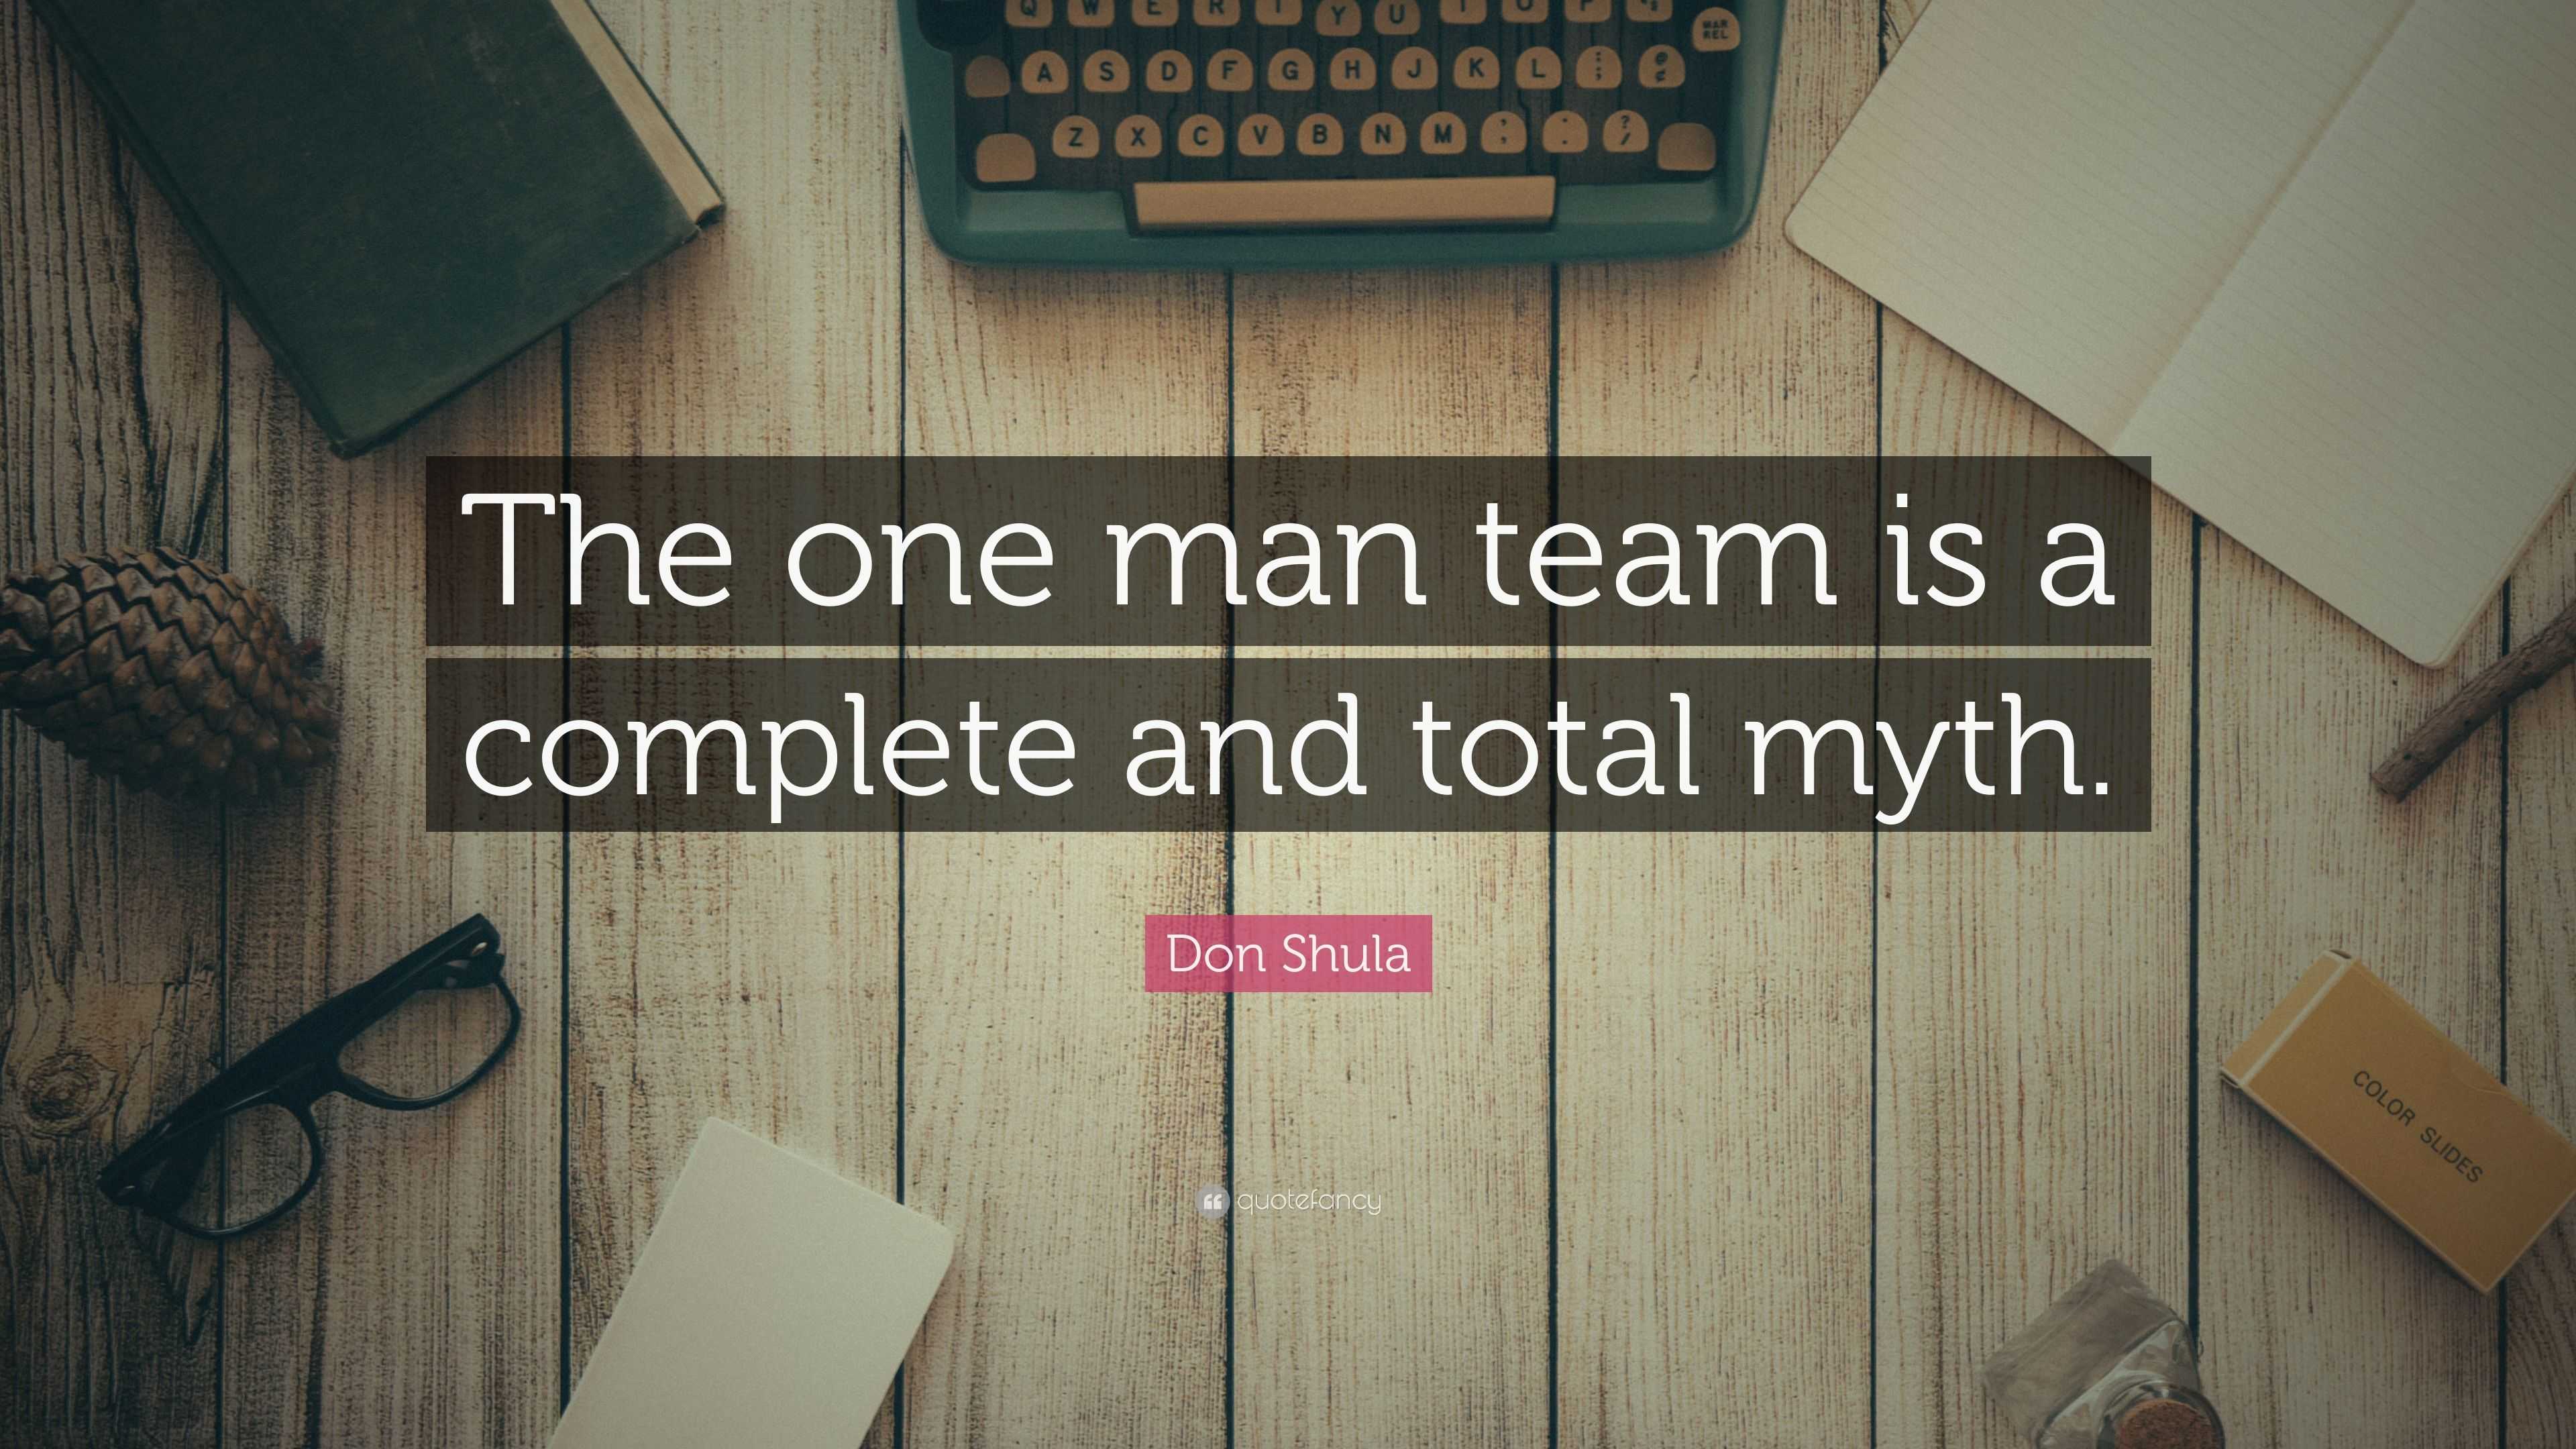 Don Shula Quote: “The one man team is a complete and total myth.”